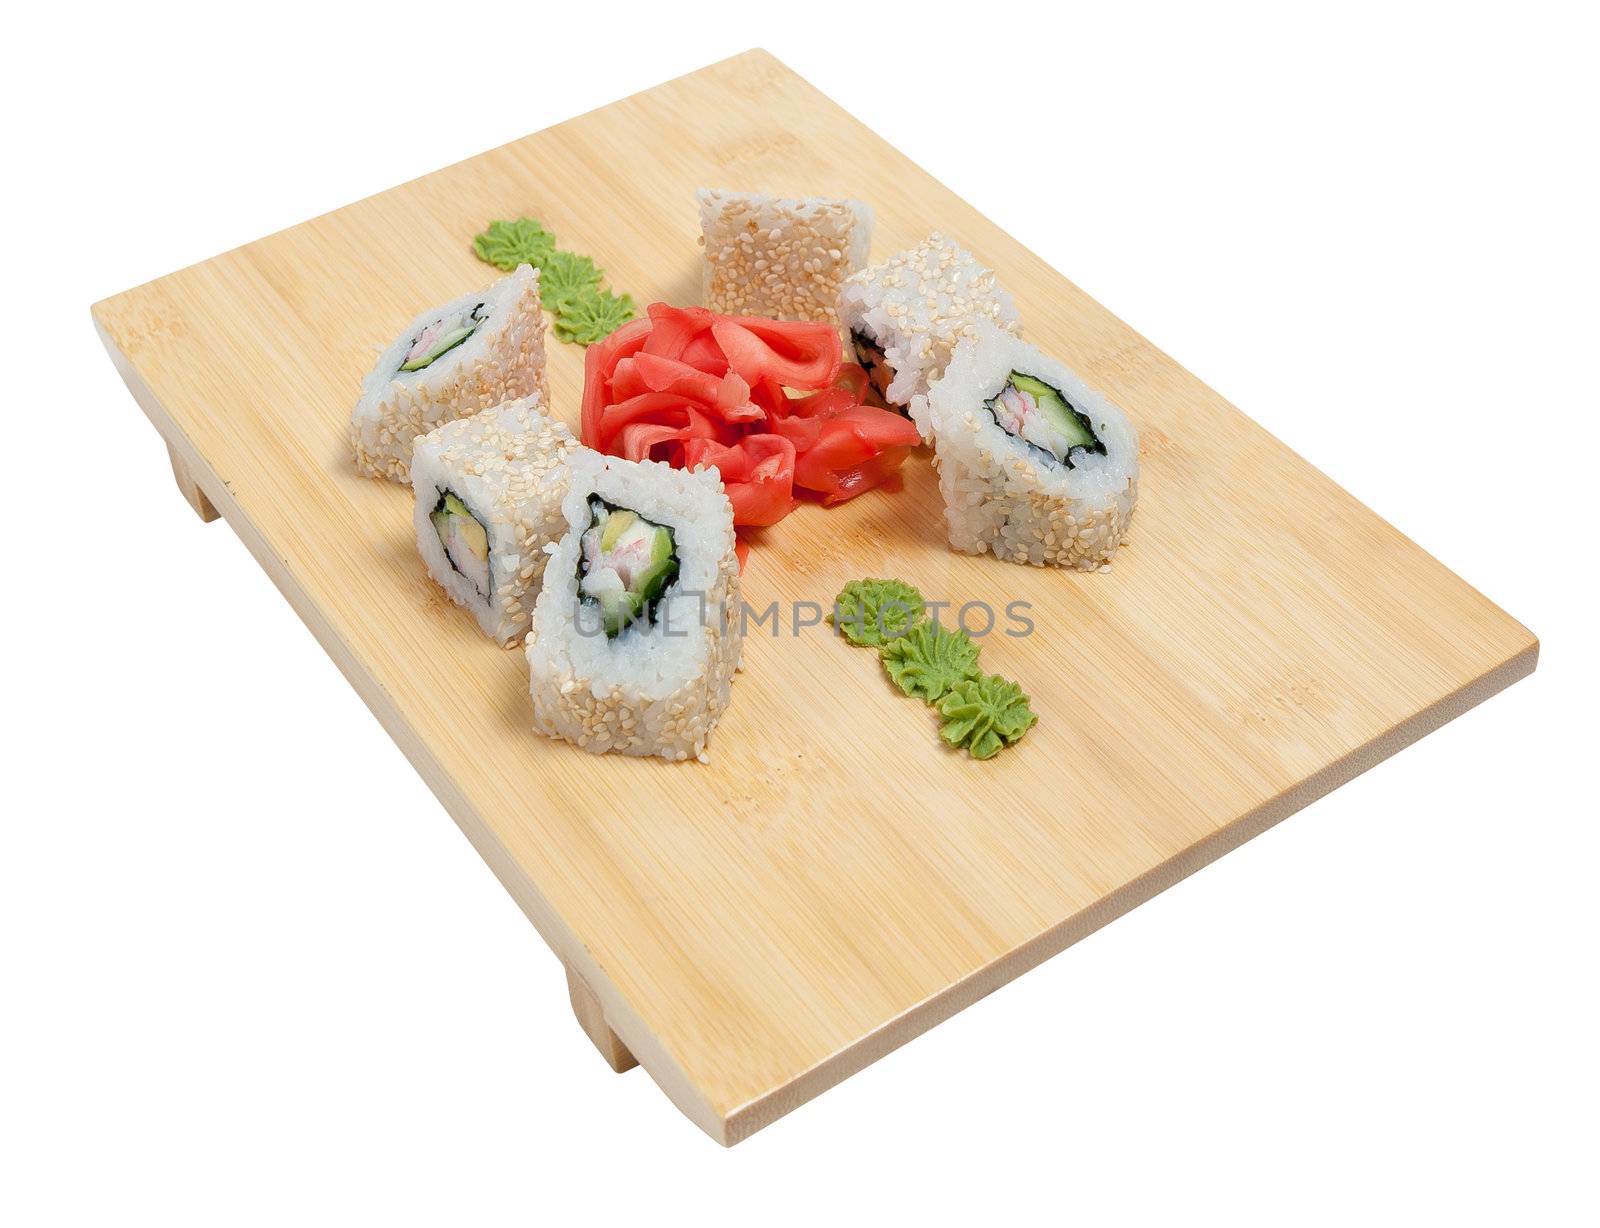 Sushi on wooden stand isolated on white background